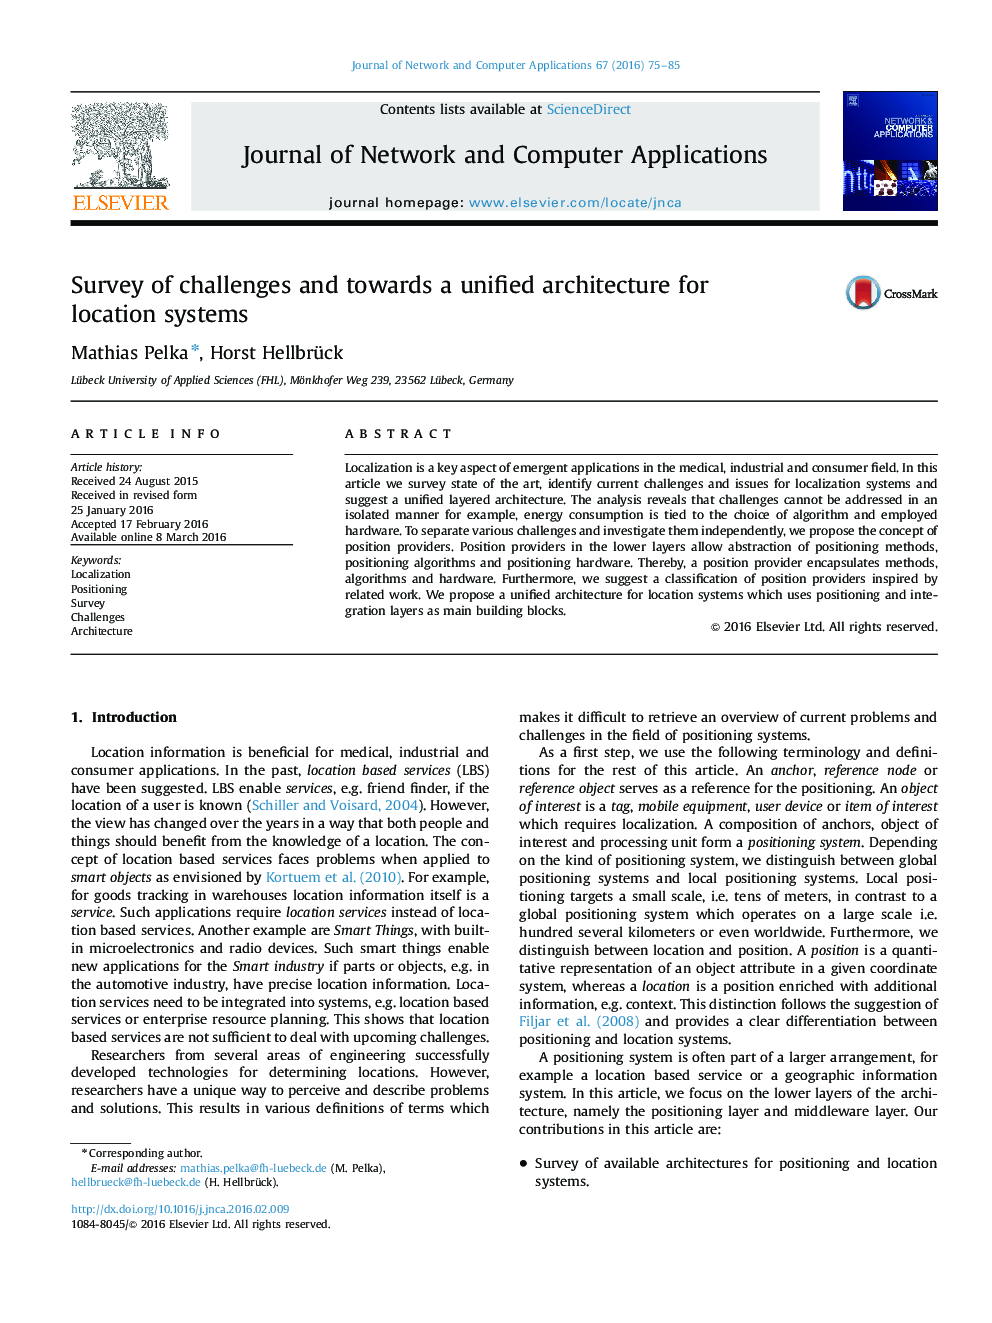 Survey of challenges and towards a unified architecture for location systems